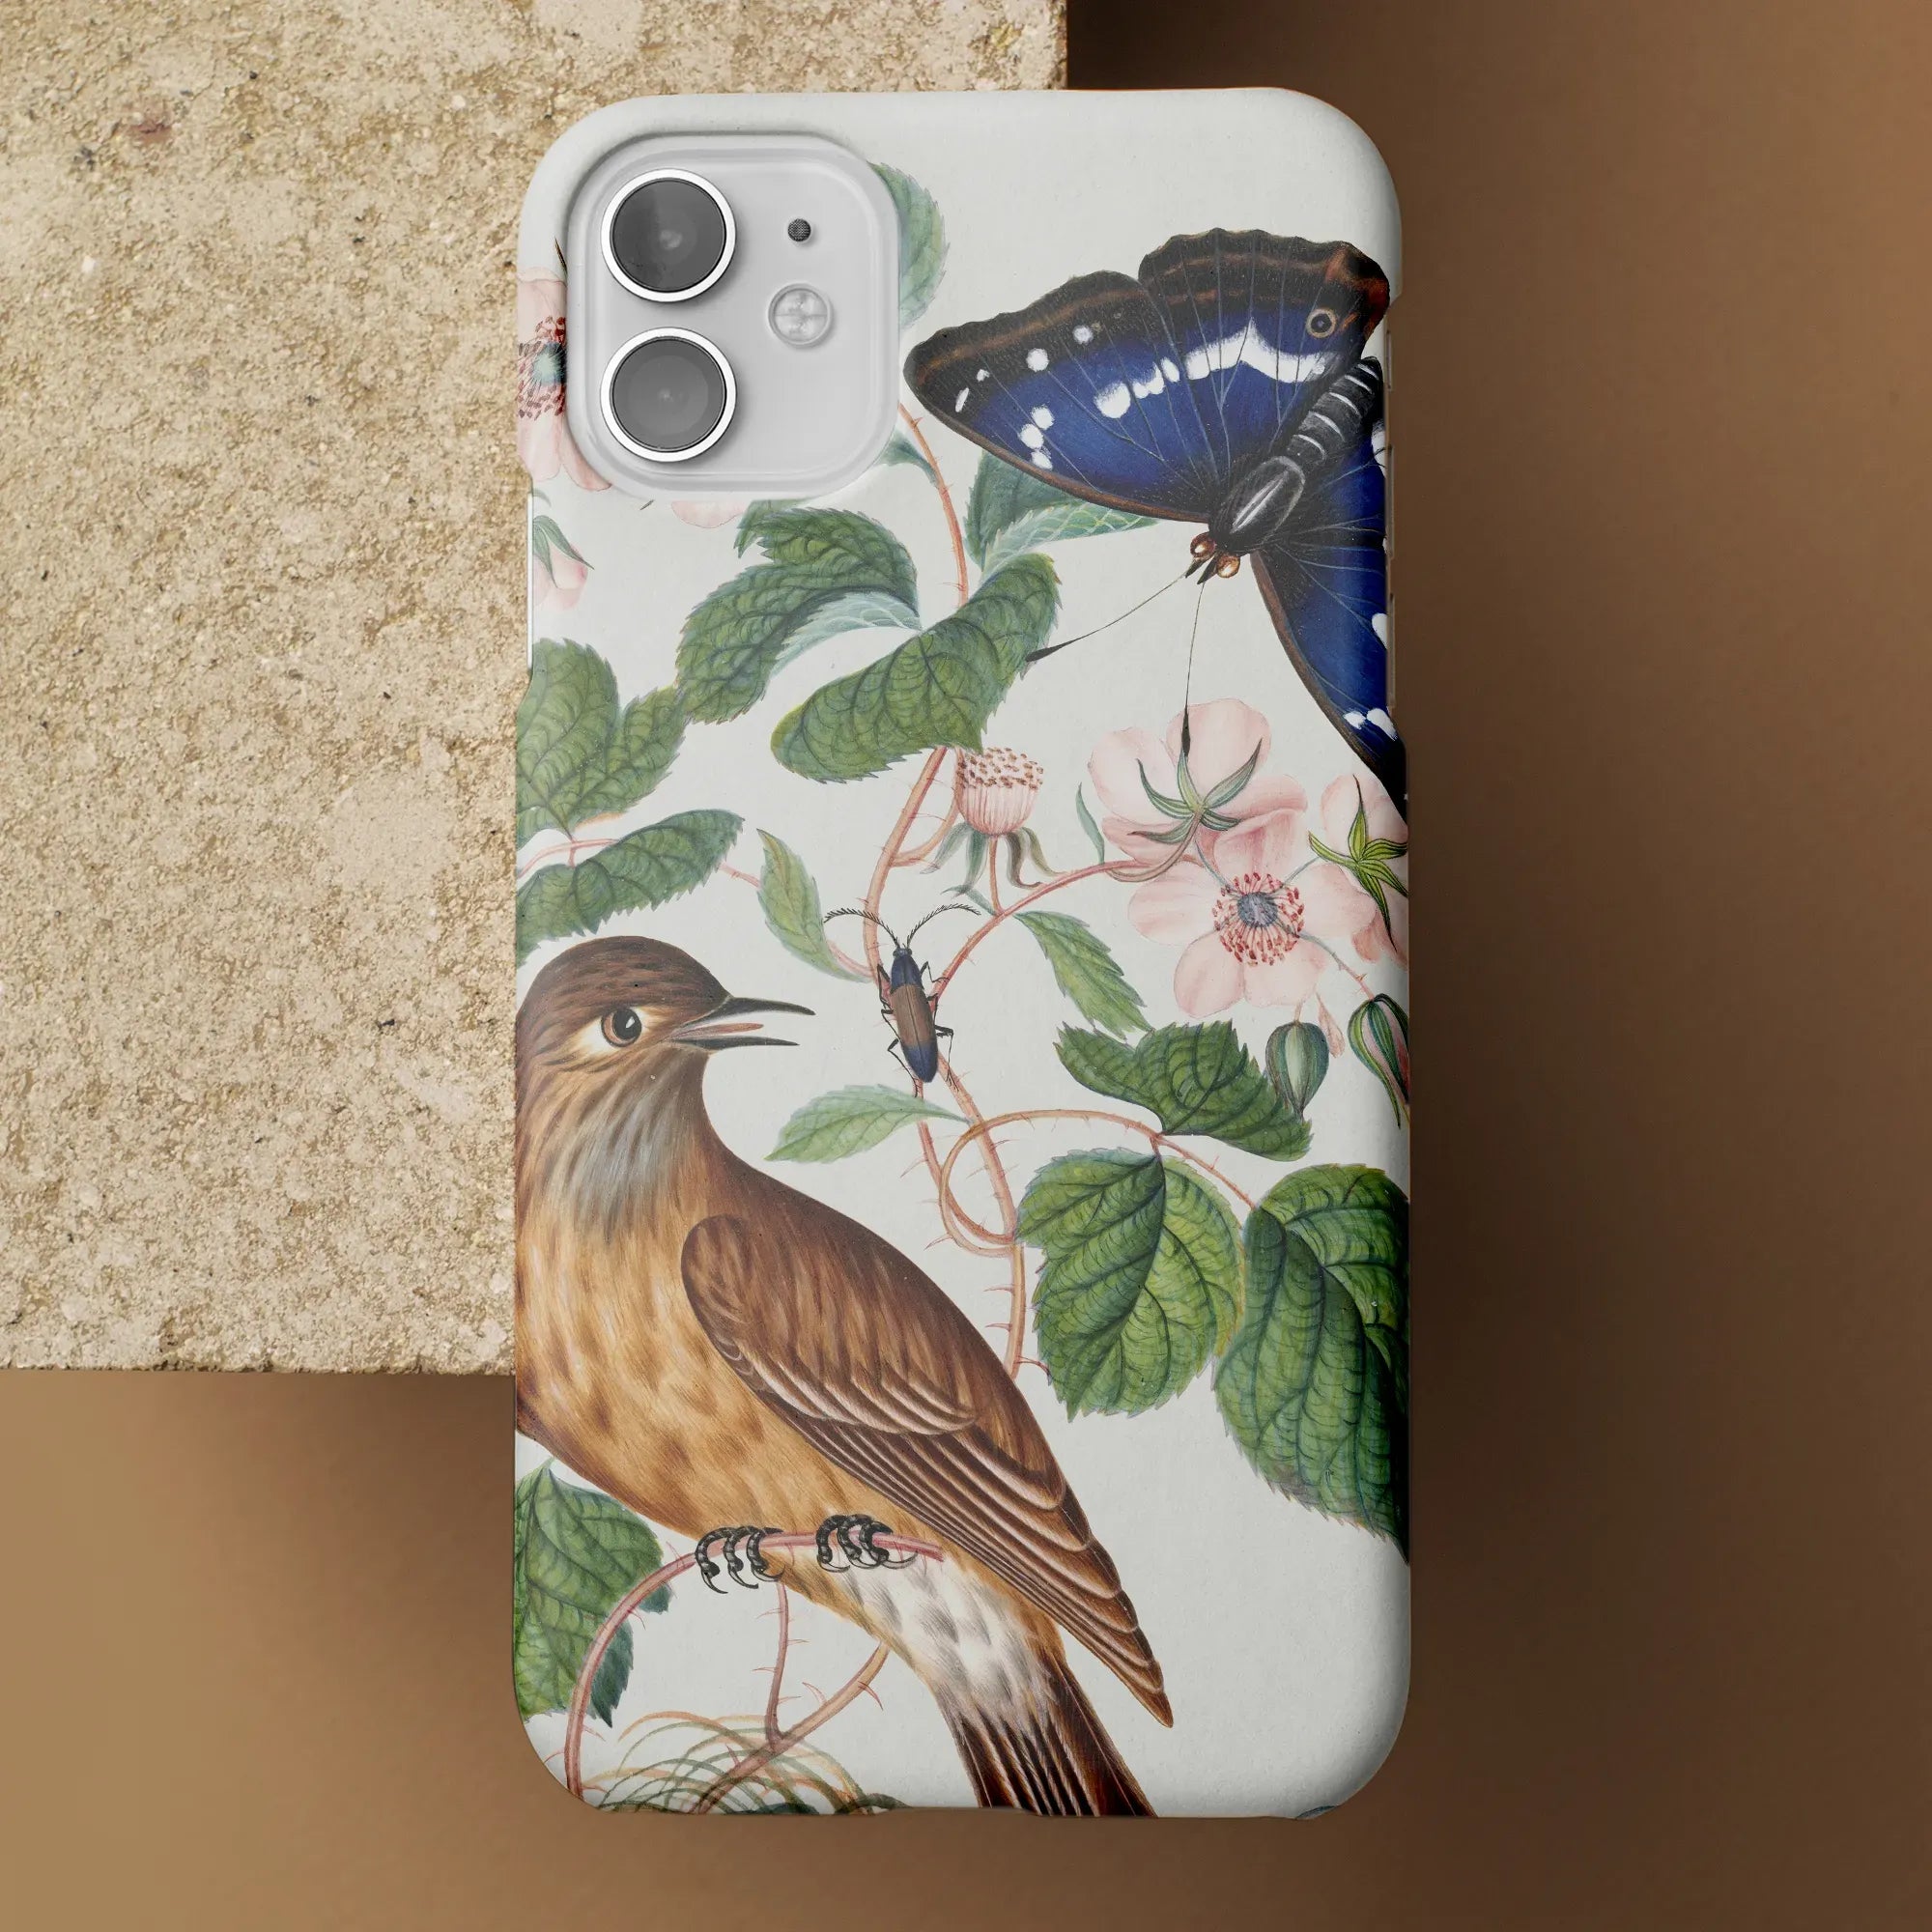 Flycatcher Emperor And Beetle - Art Phone Case - James Bolton - Mobile Phone Cases - Aesthetic Art